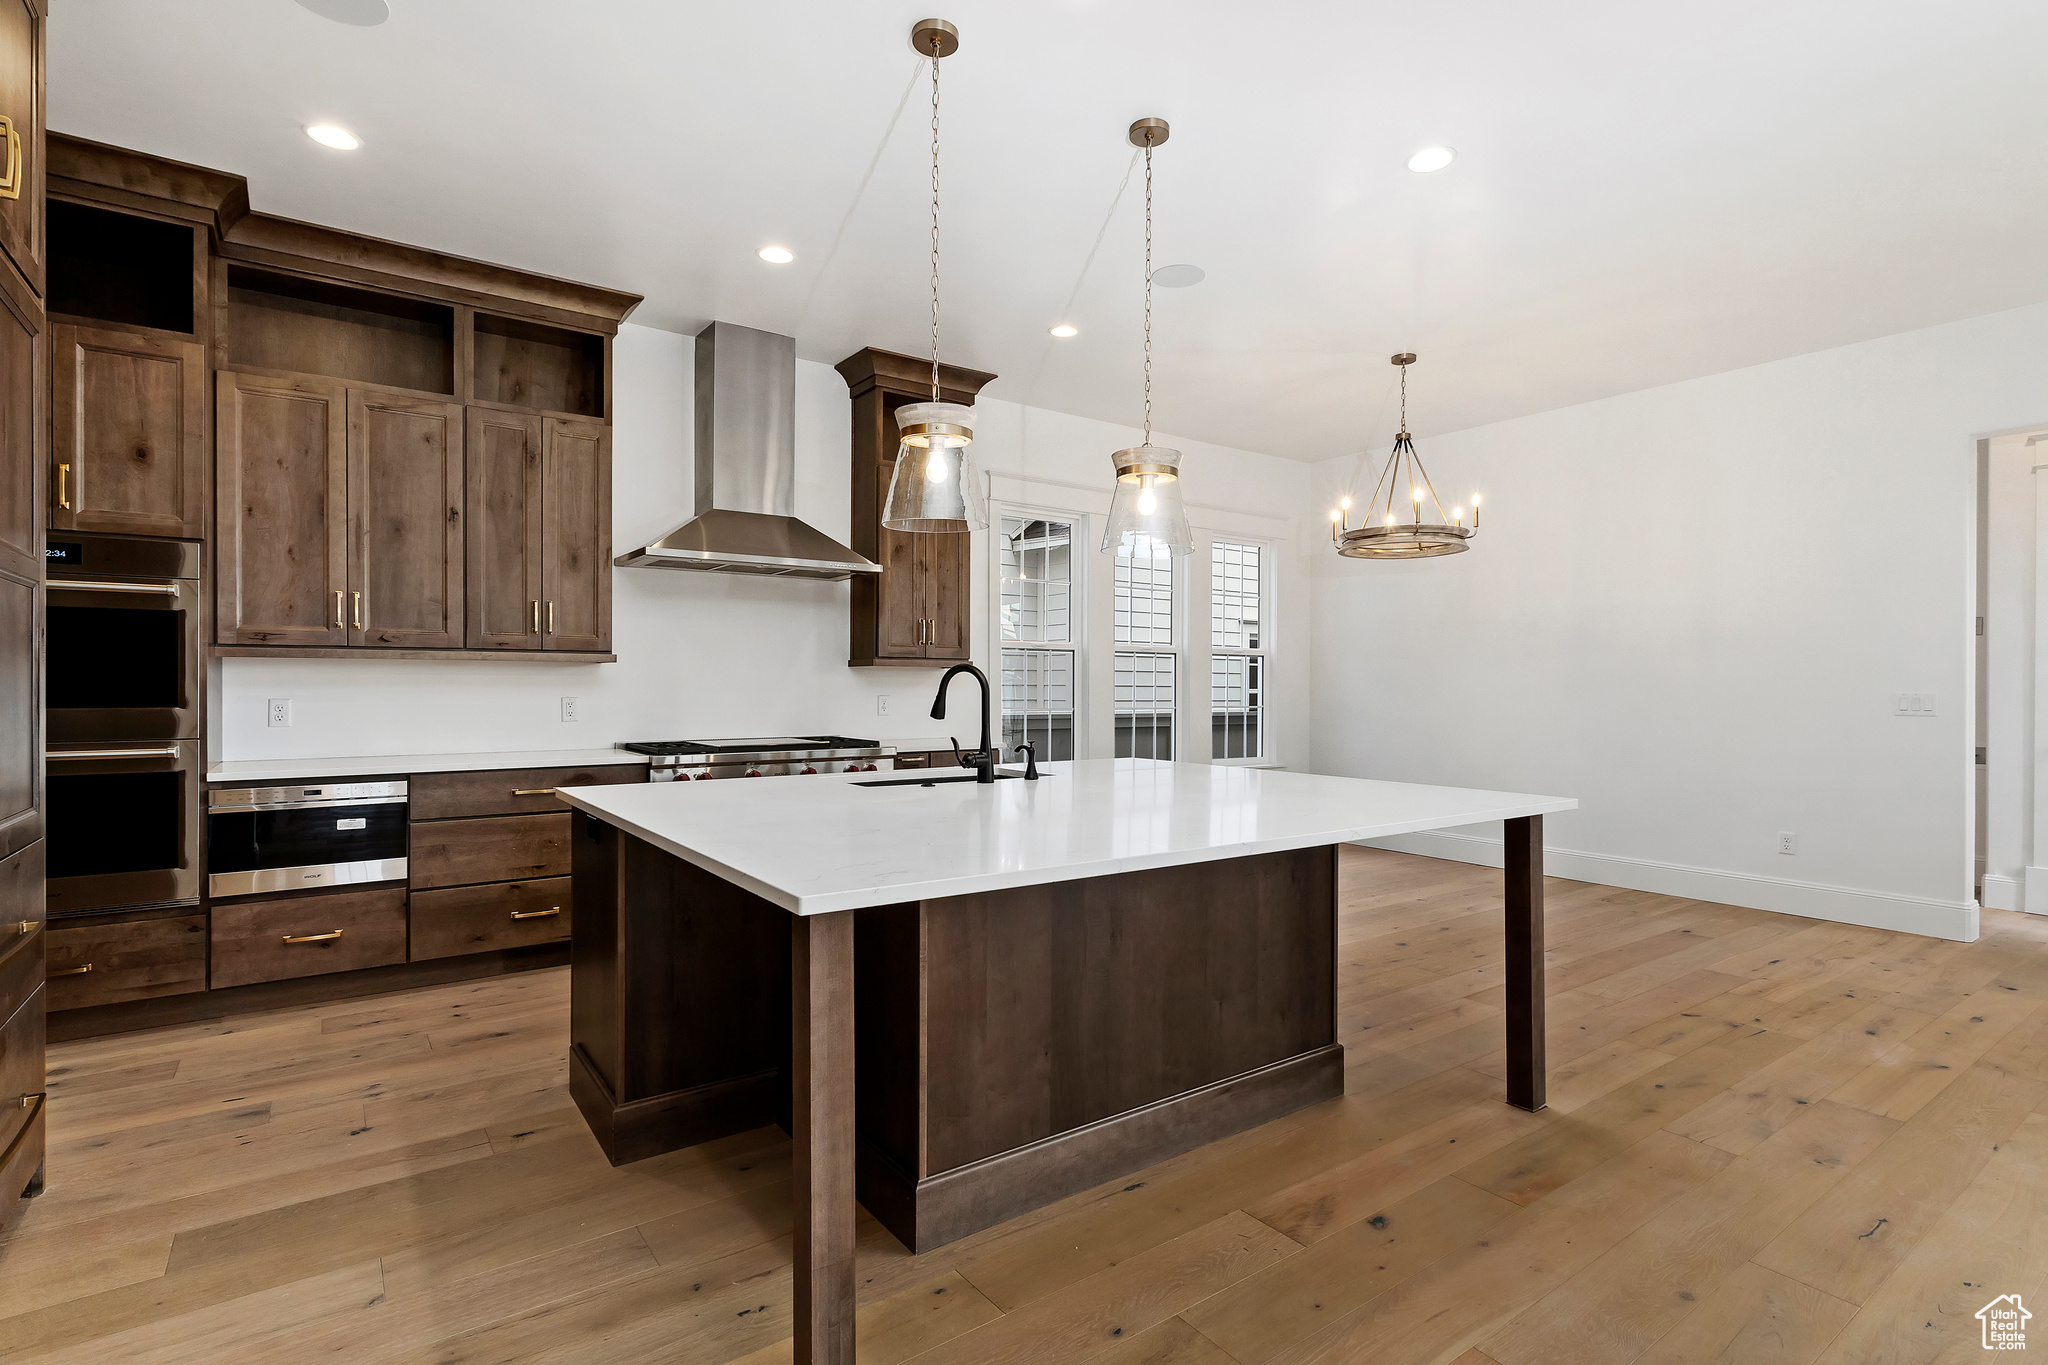 Kitchen with light wood-type flooring, pendant lighting, a notable chandelier, appliances with stainless steel finishes, and wall chimney range hood